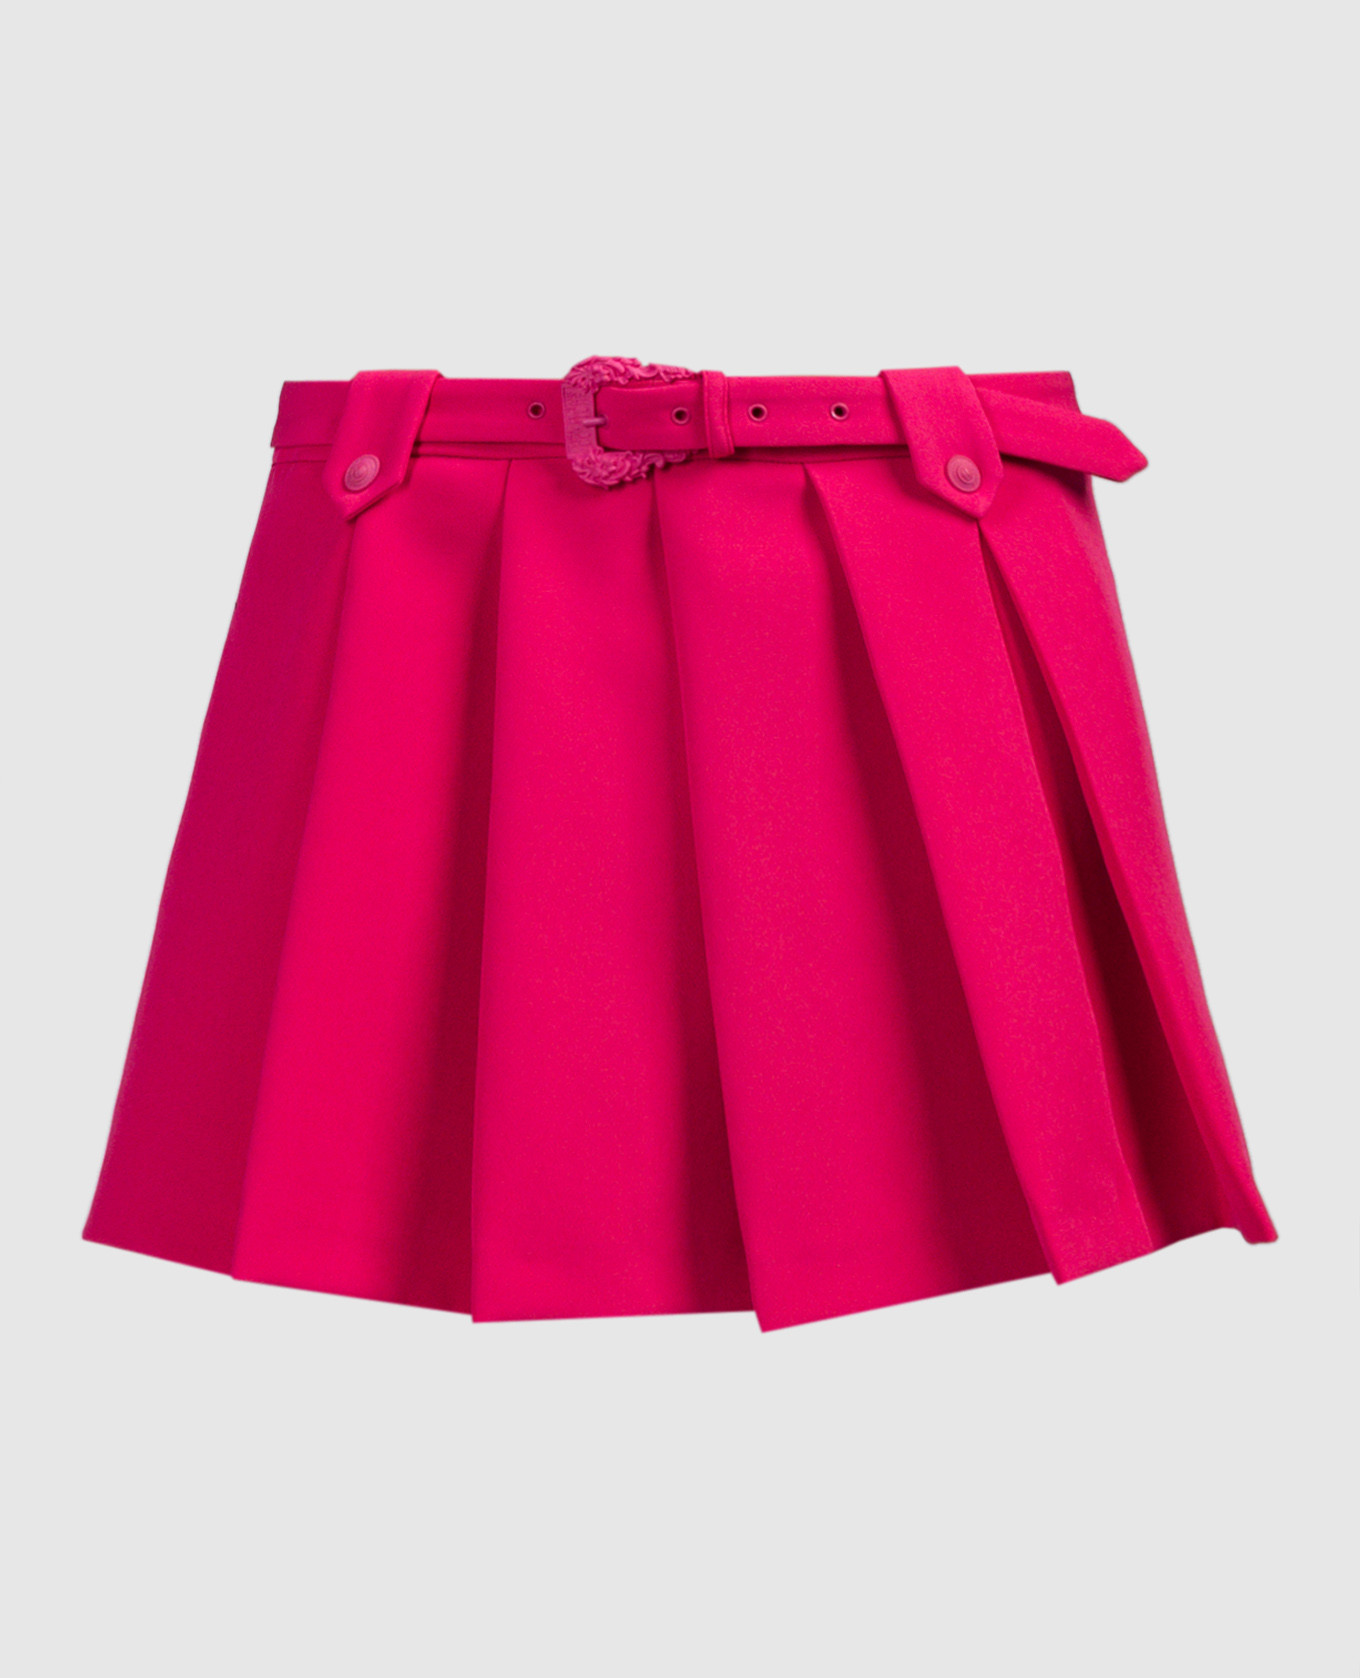 Pink mini skirt with snaps